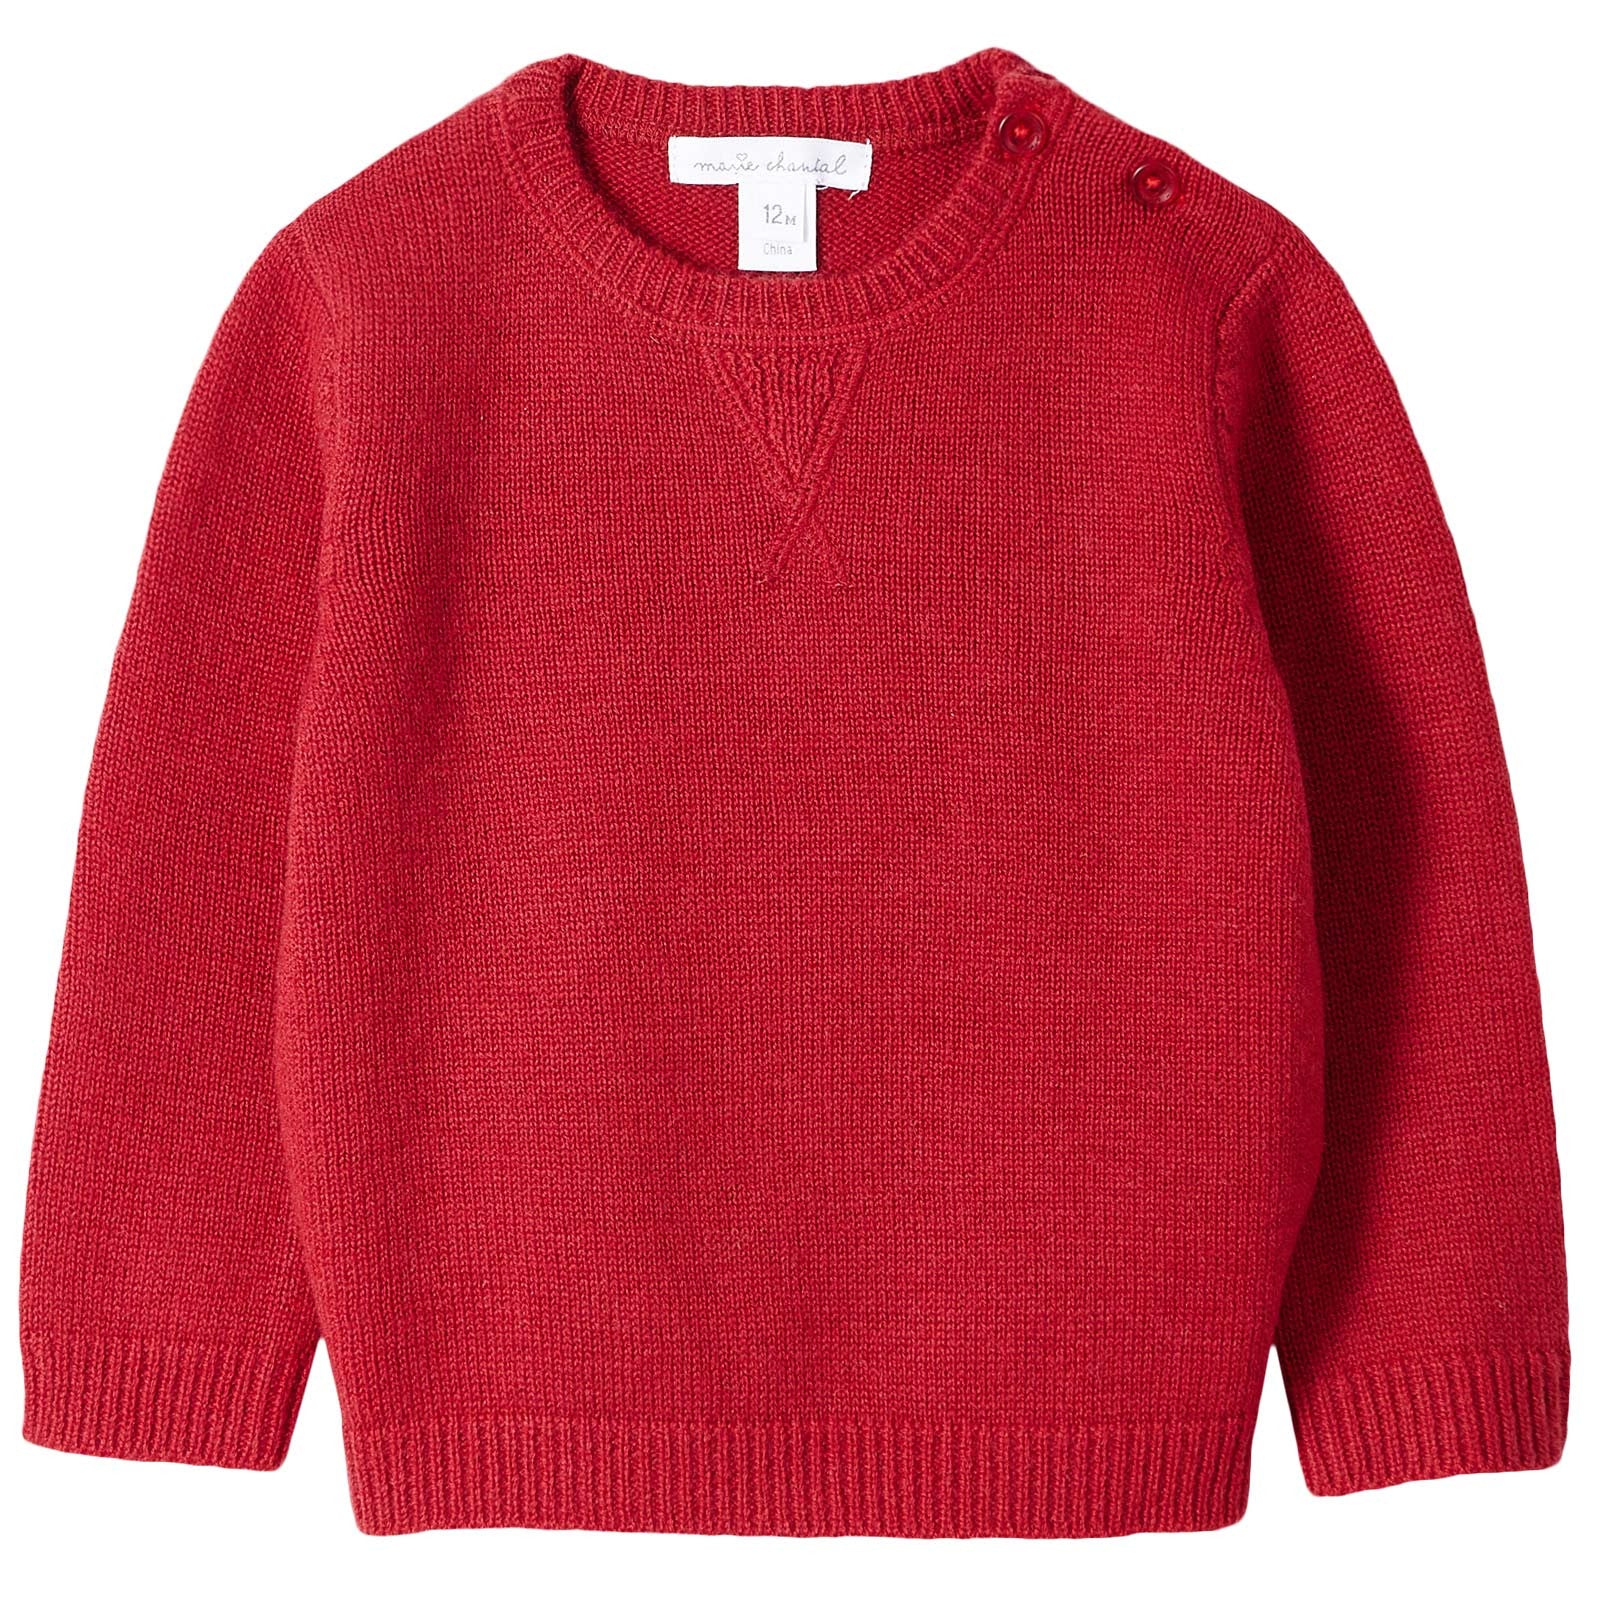 Baby Boys Red  Elbow Patch Sweater - CÉMAROSE | Children's Fashion Store - 1